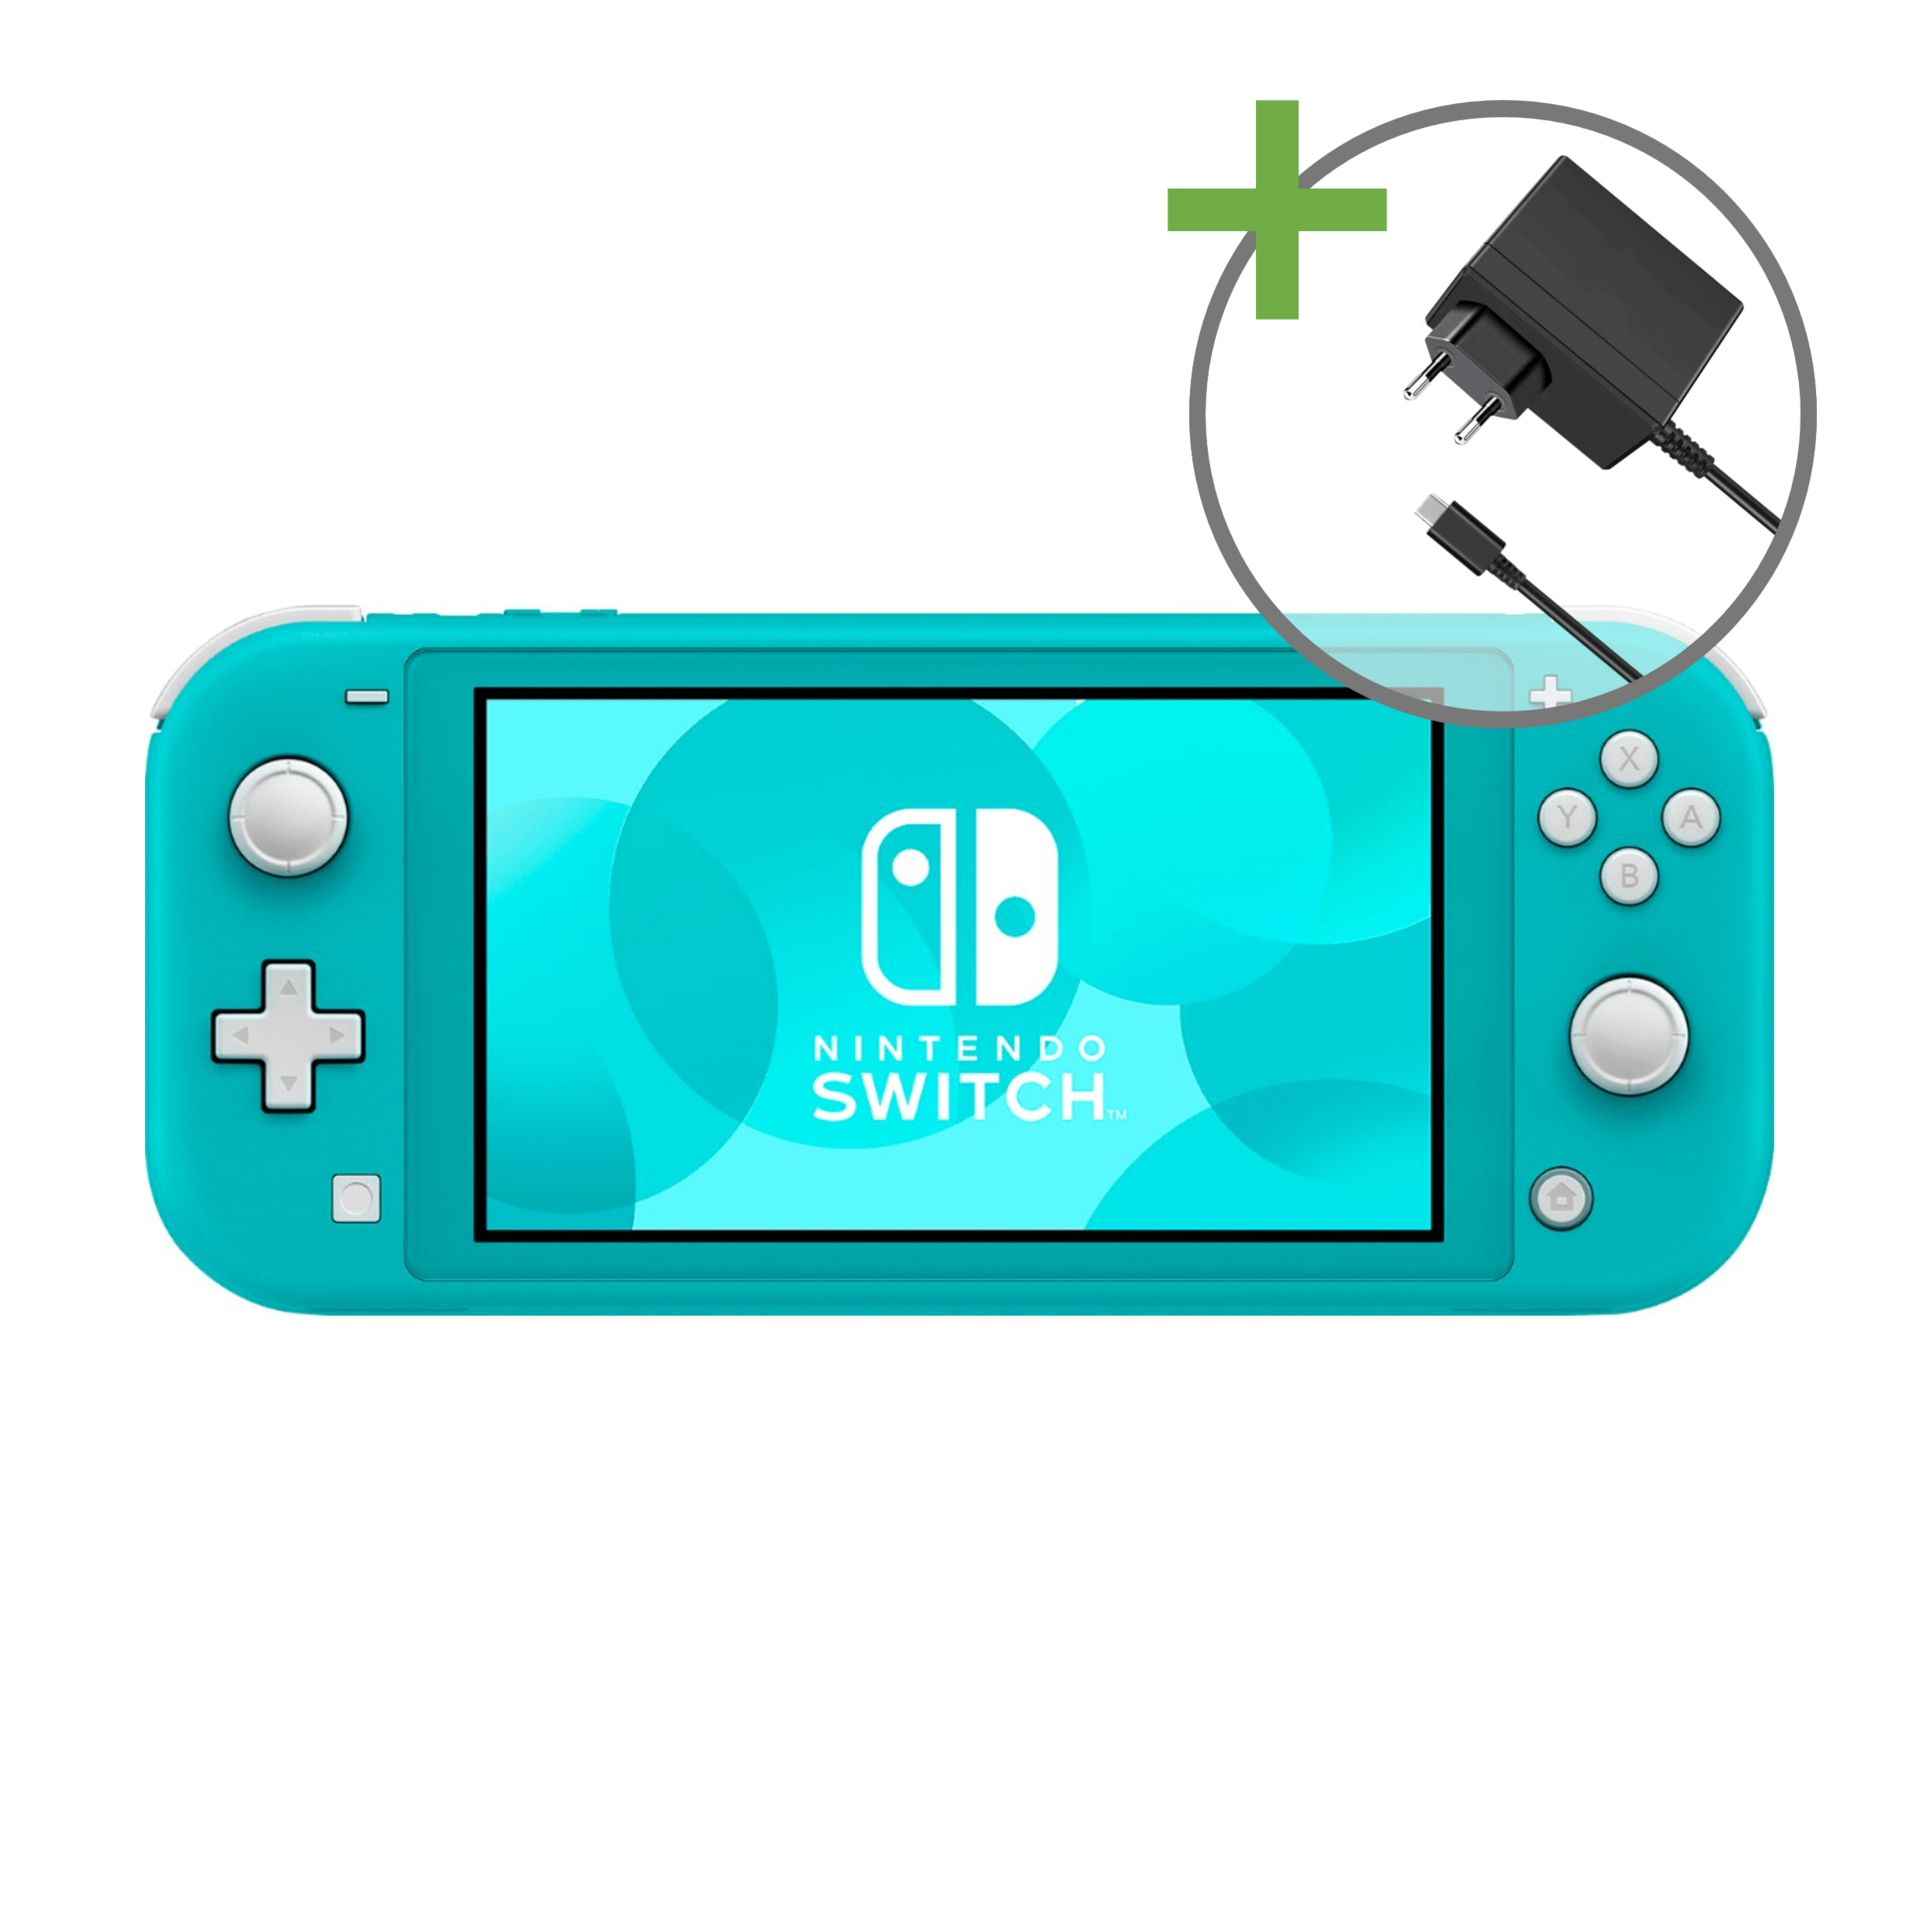 Nintendo Switch Lite Console - Turquoise [Complete] - Nintendo Switch Hardware - 2